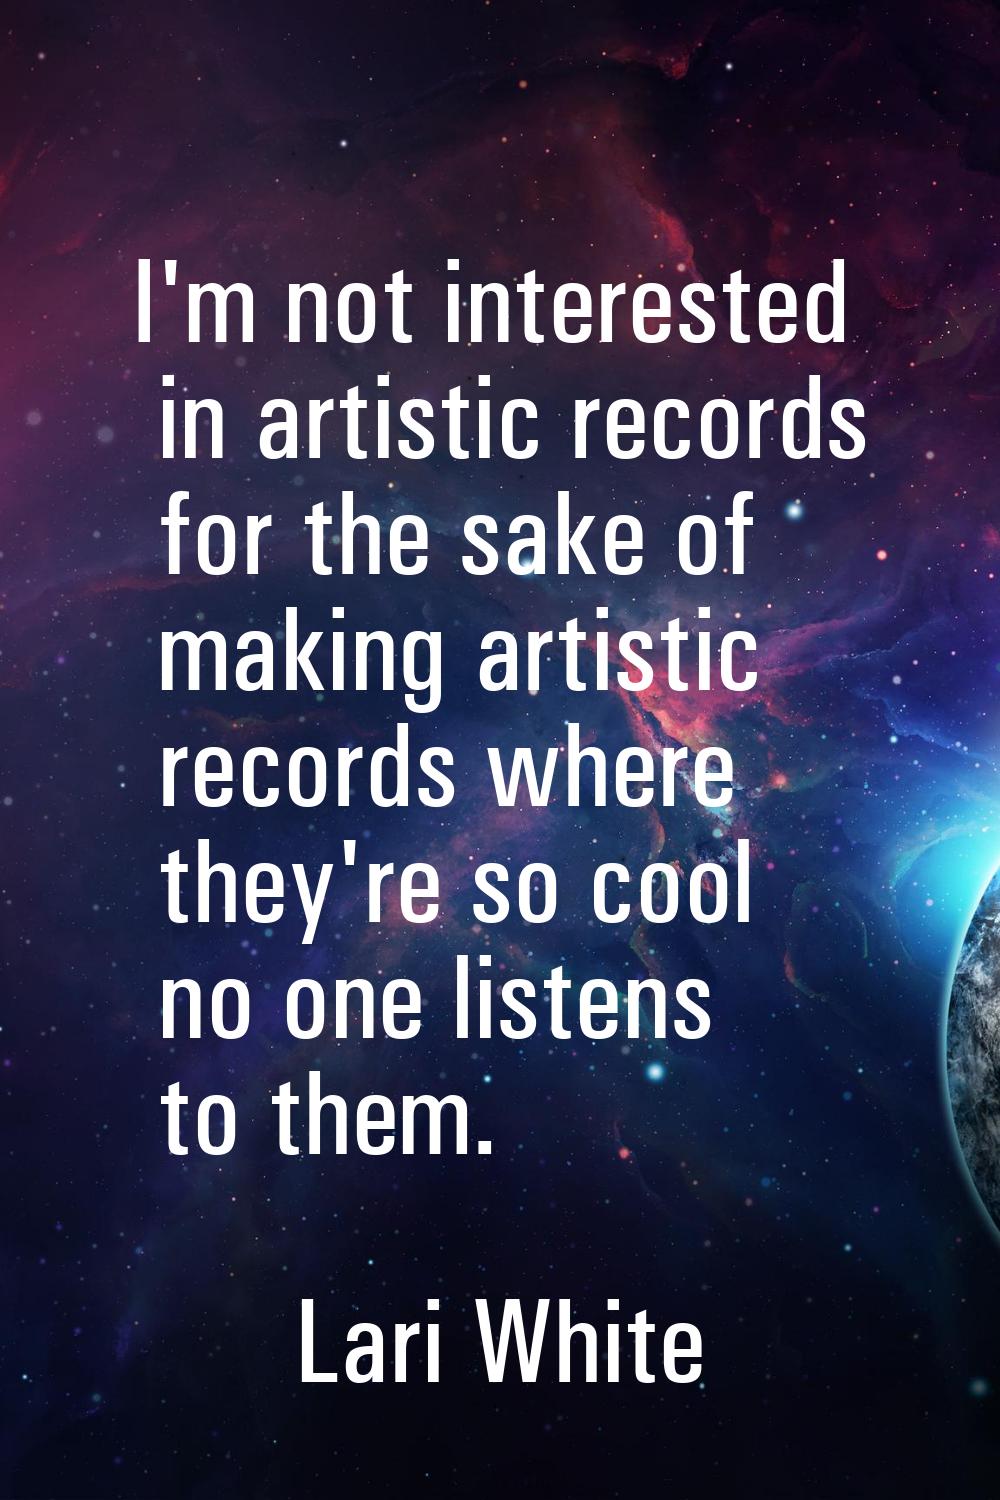 I'm not interested in artistic records for the sake of making artistic records where they're so coo